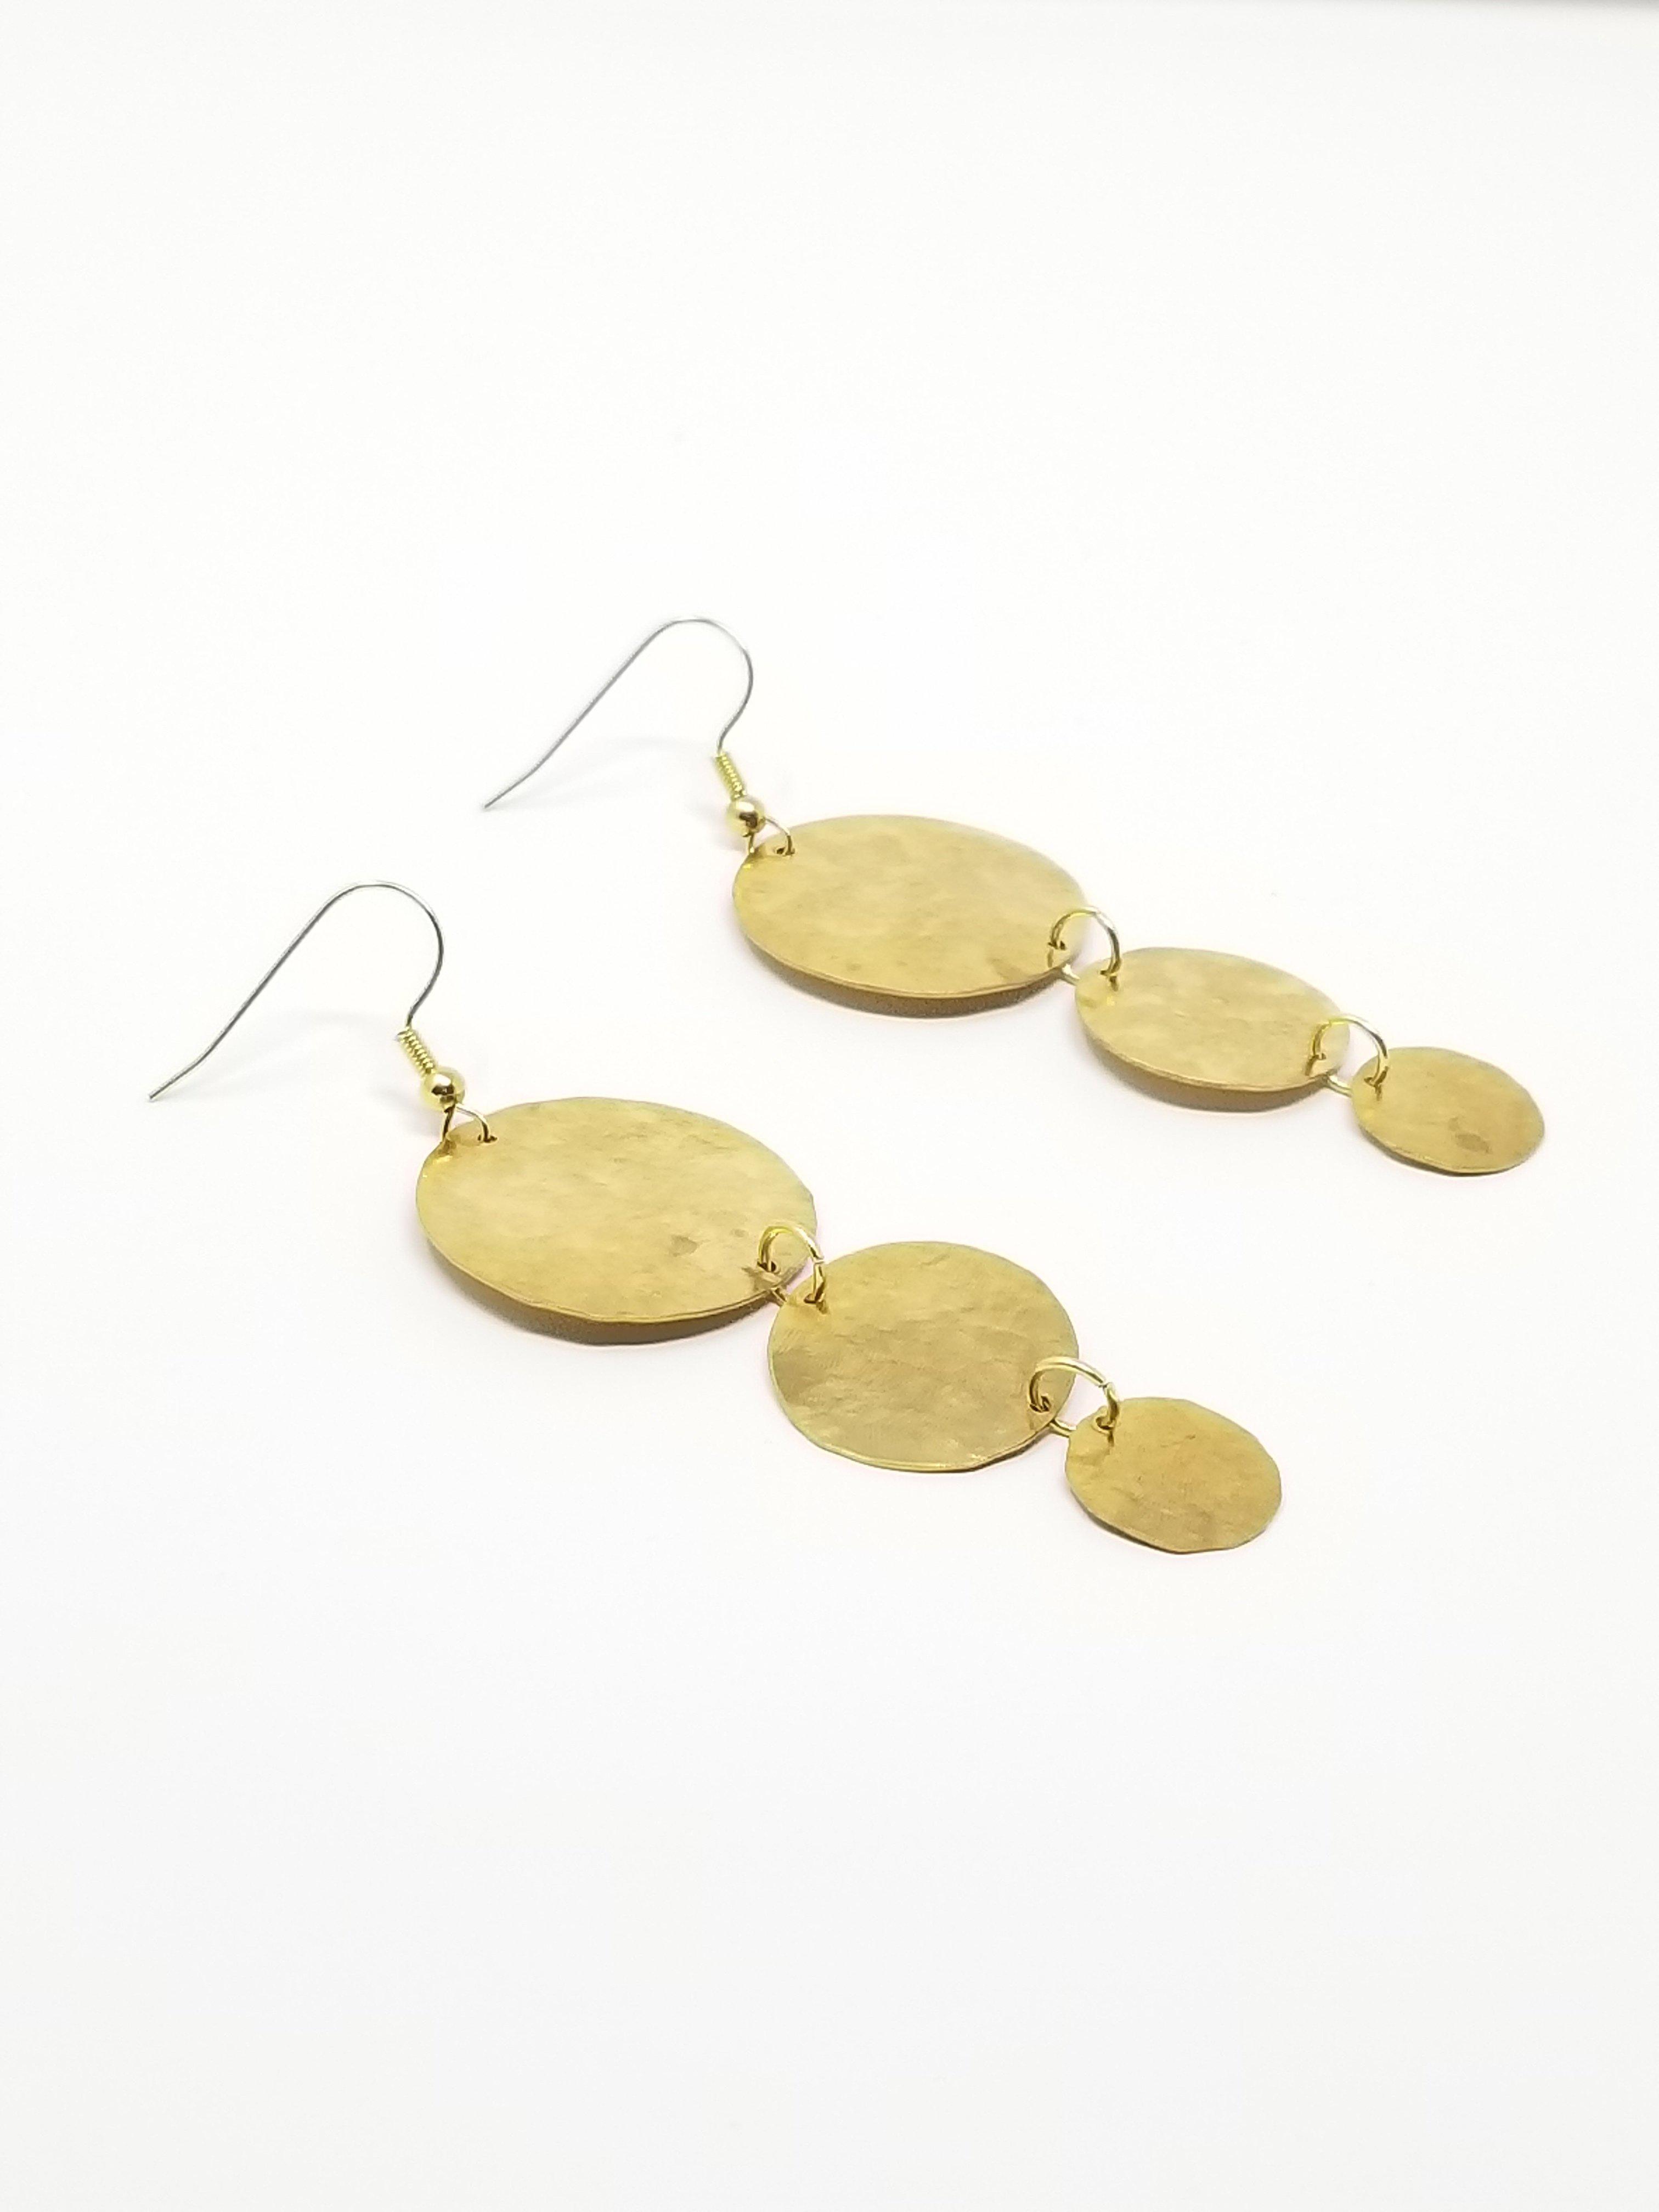 Descending Moons - Recycled Brass Textured Earrings